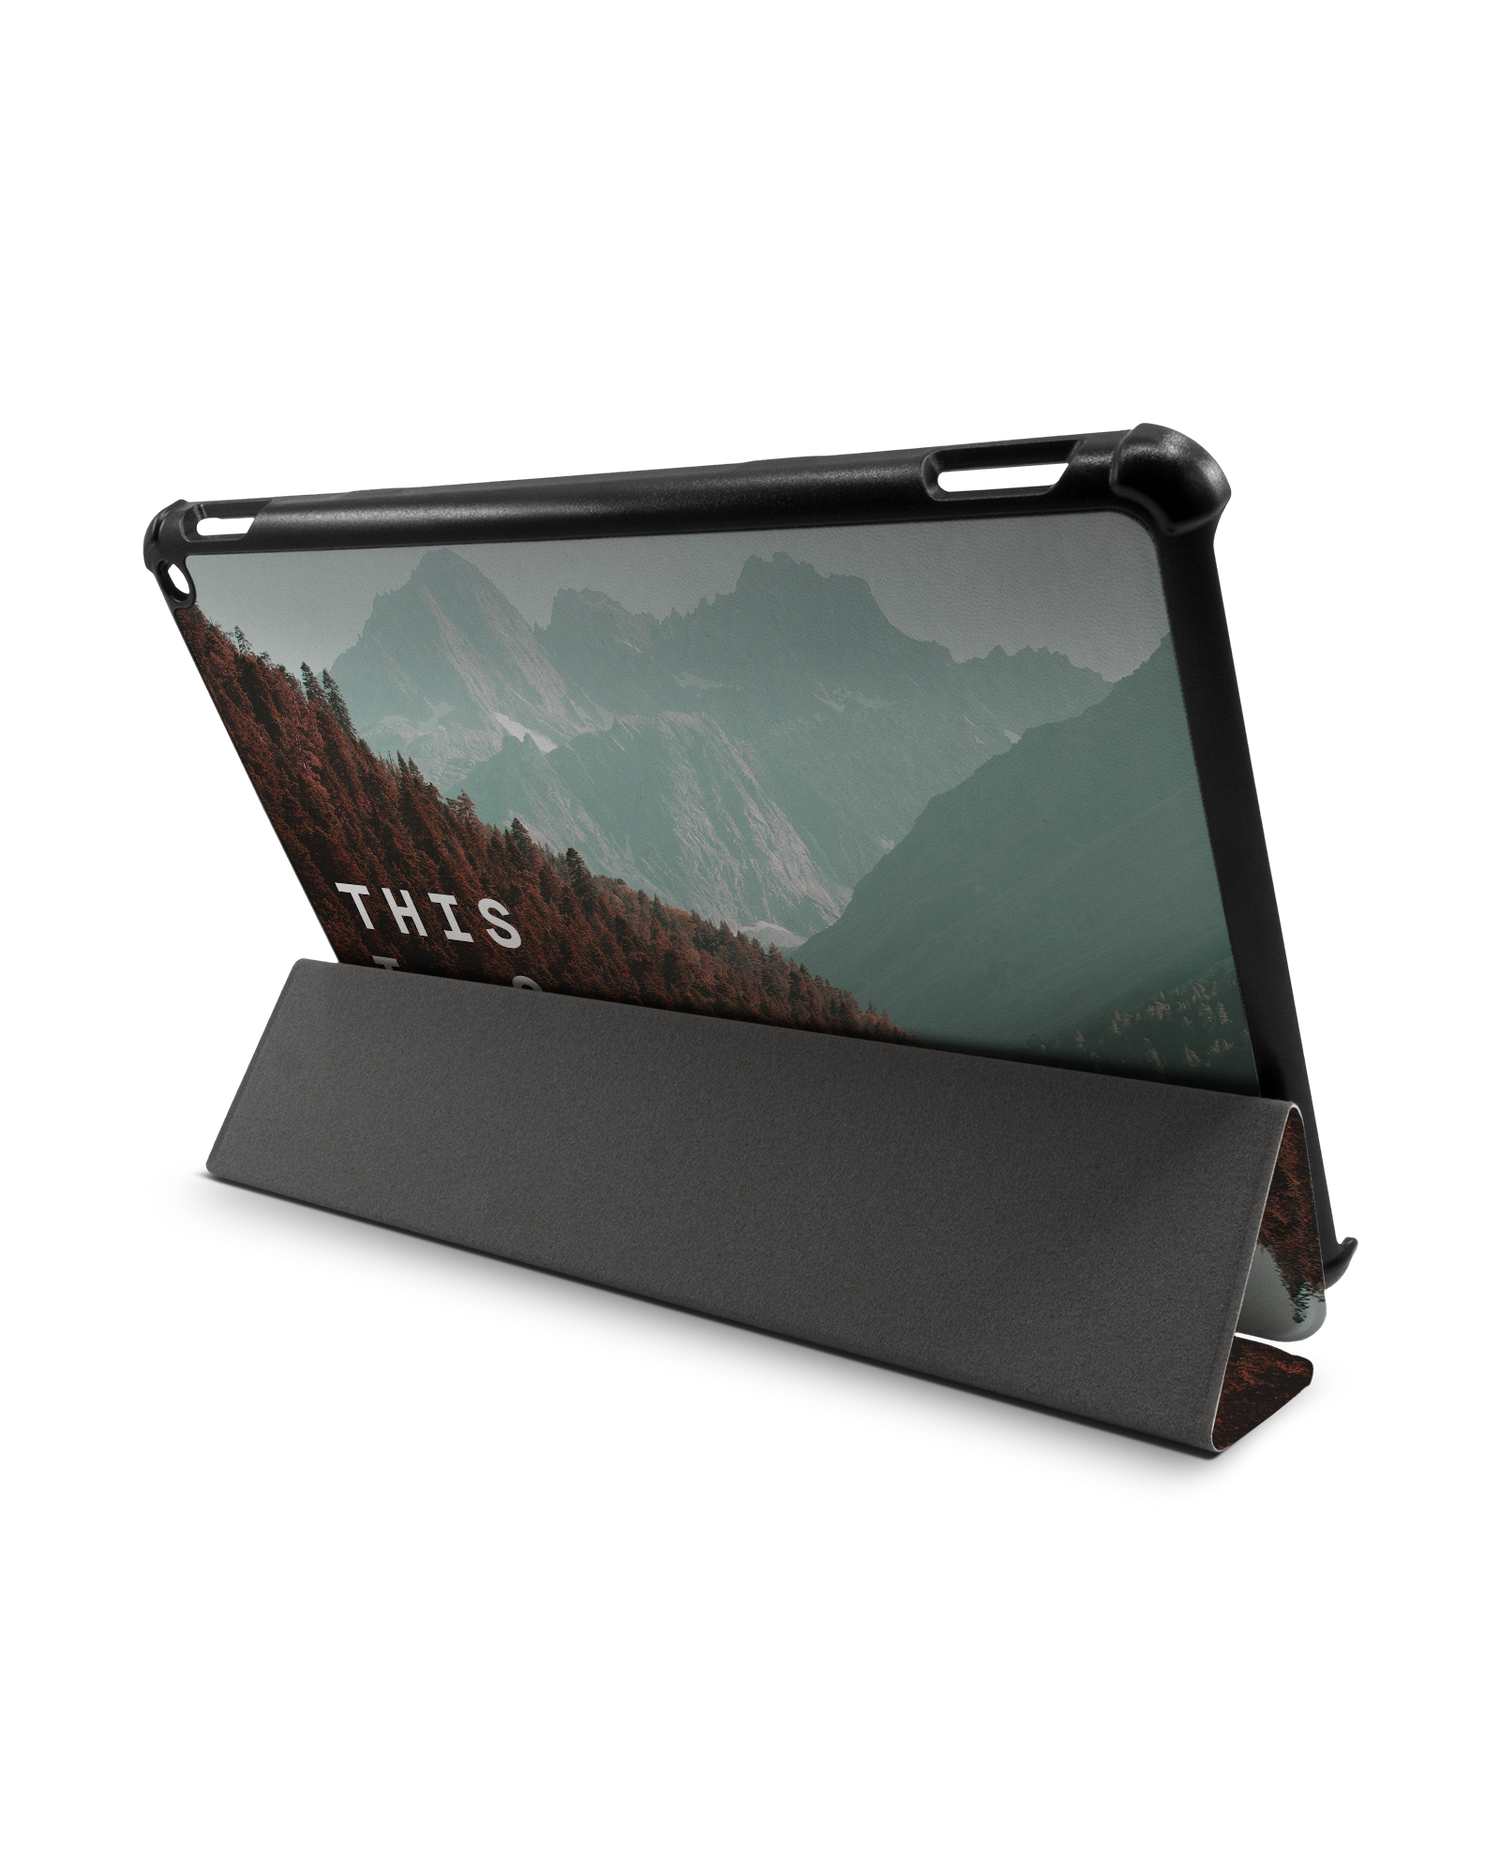 Into the Woods Tablet Smart Case for Amazon Fire HD 10 (2021): Used as Stand